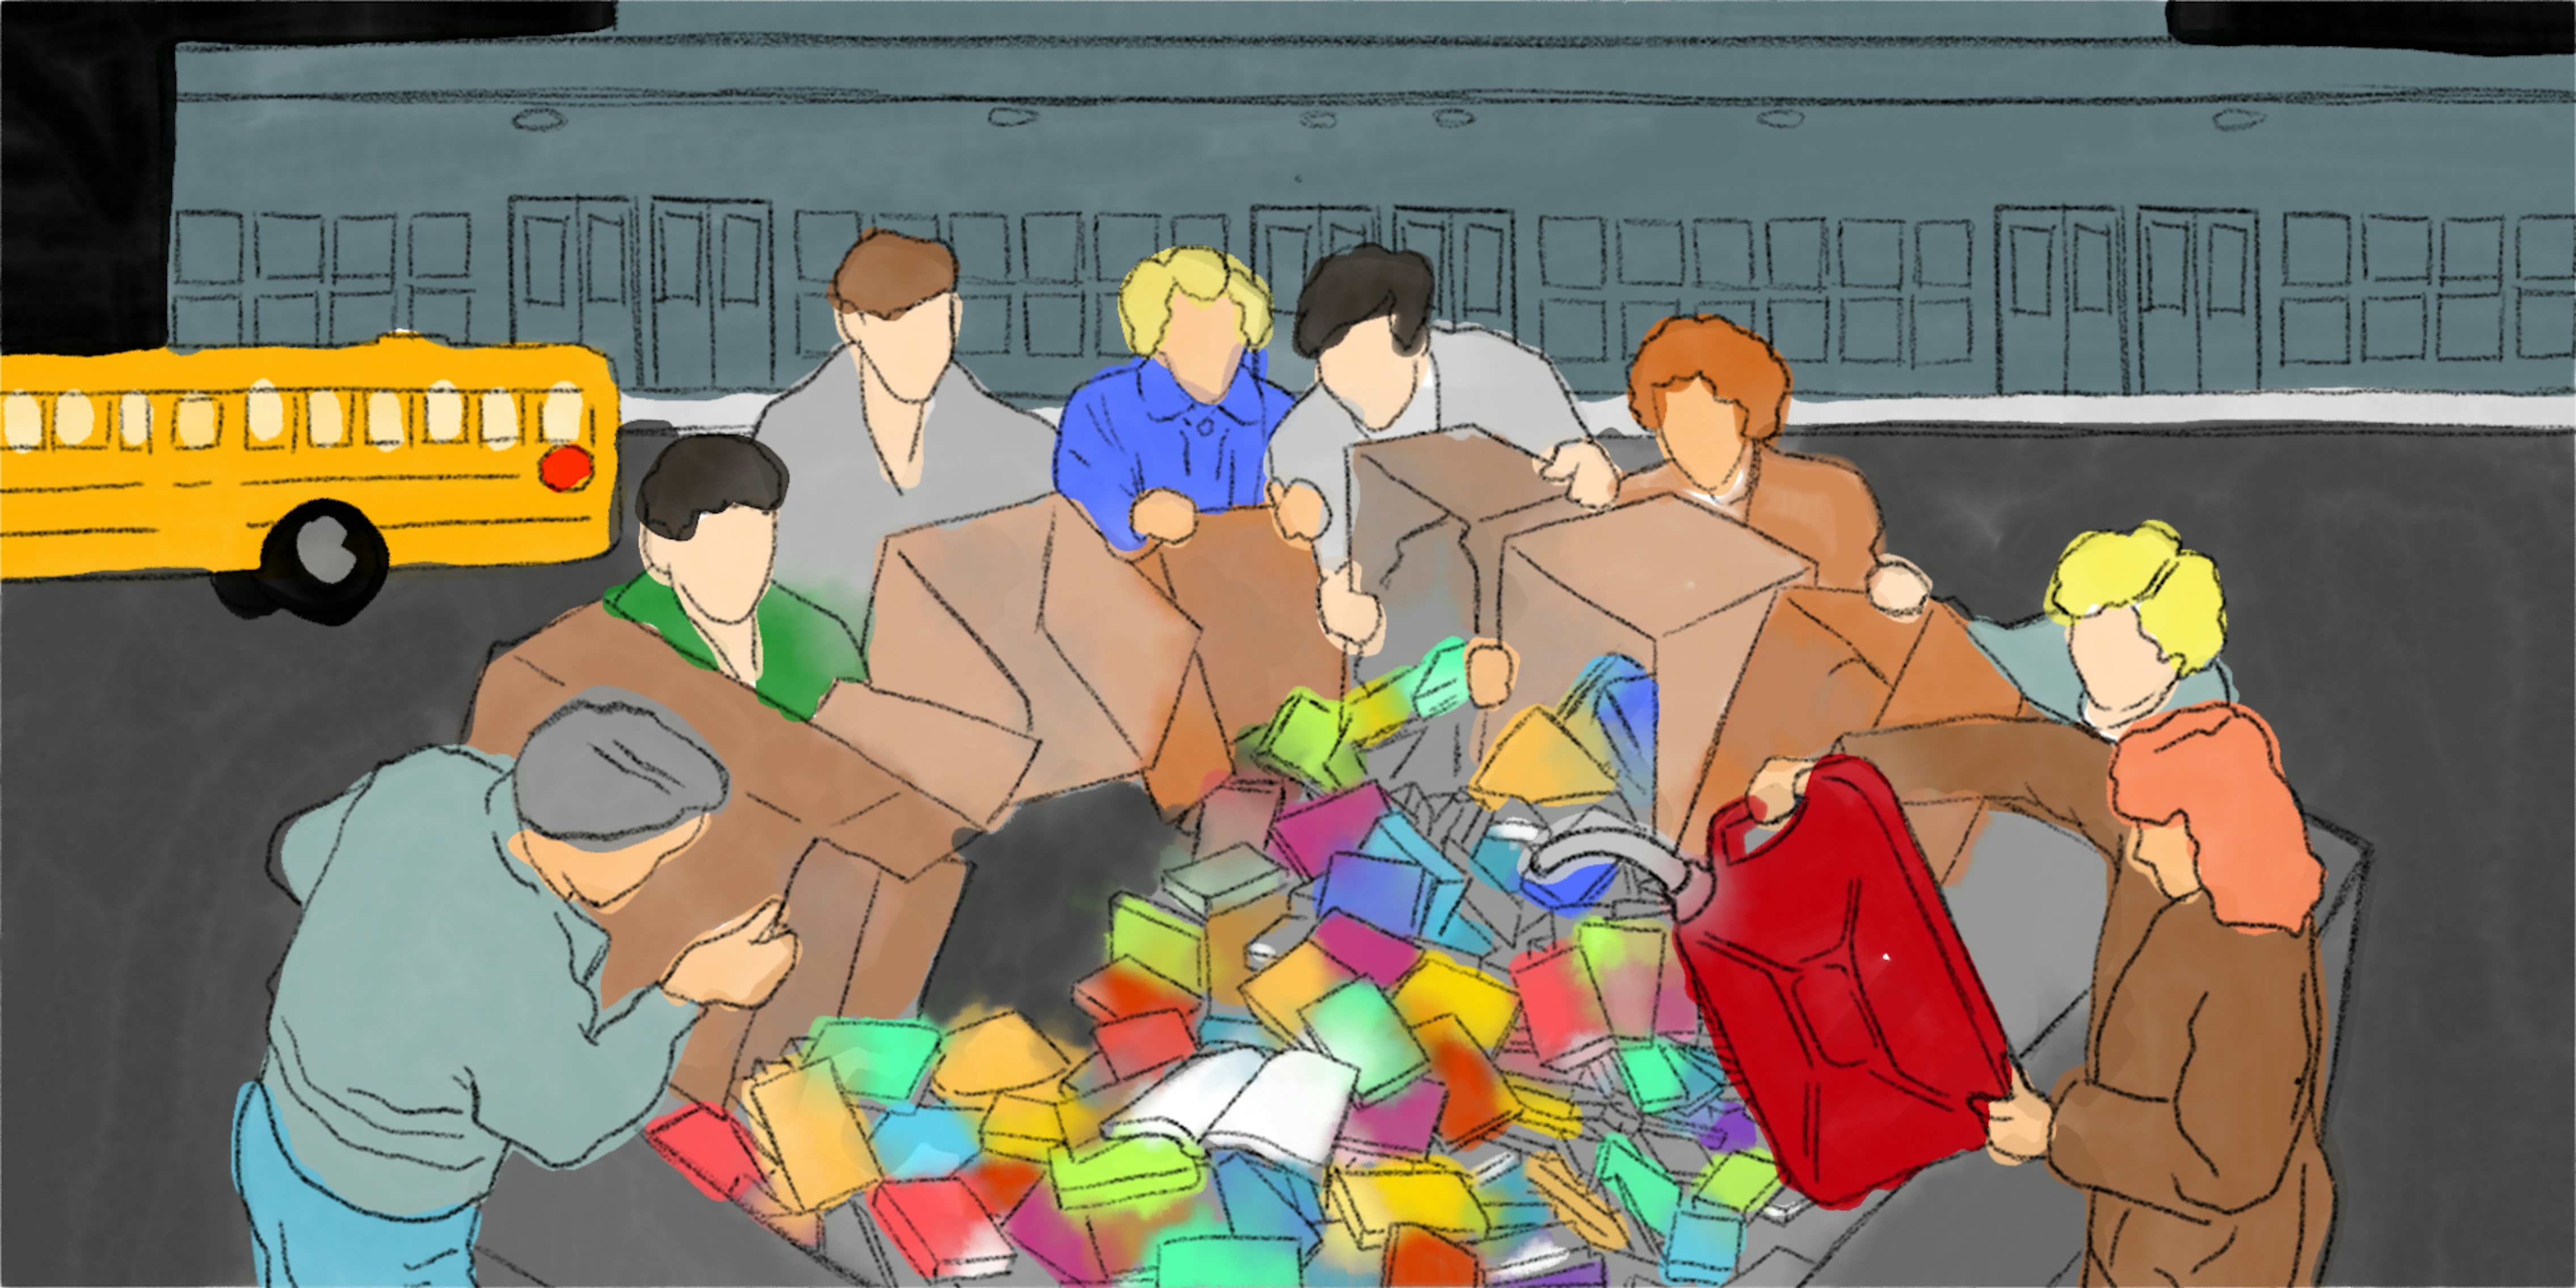 watercolor painting of a group of people starting a fire with books